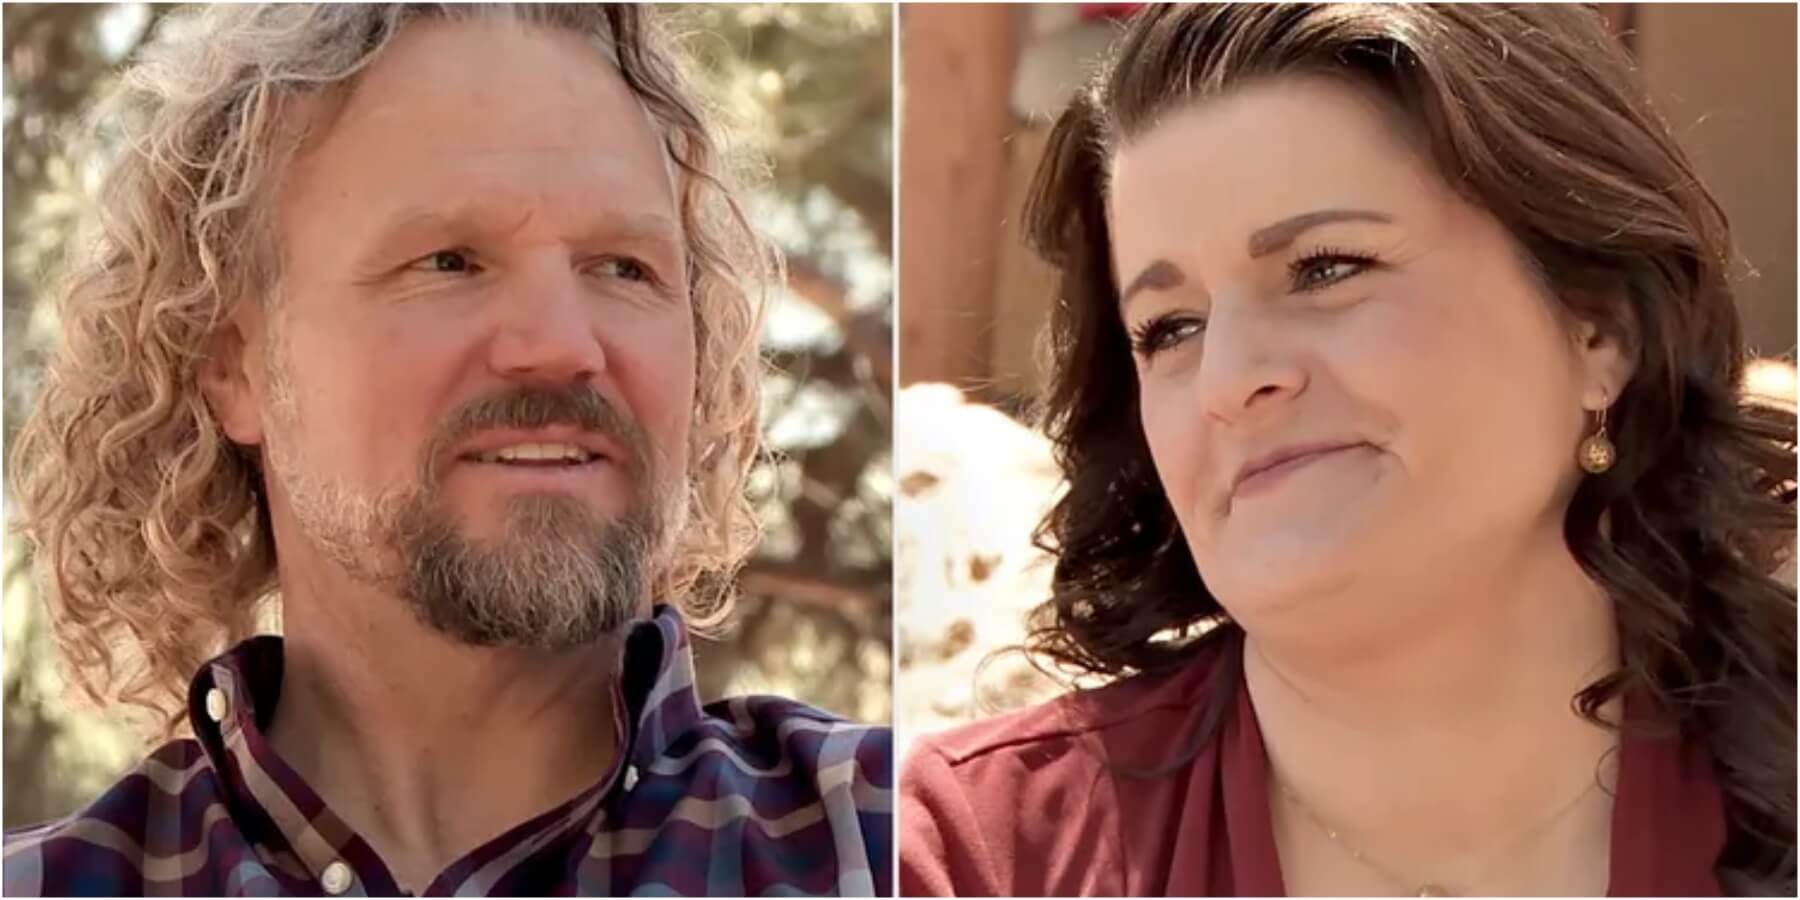 'Sister Wives' stars Kody Brown and Robyn Brown remain married